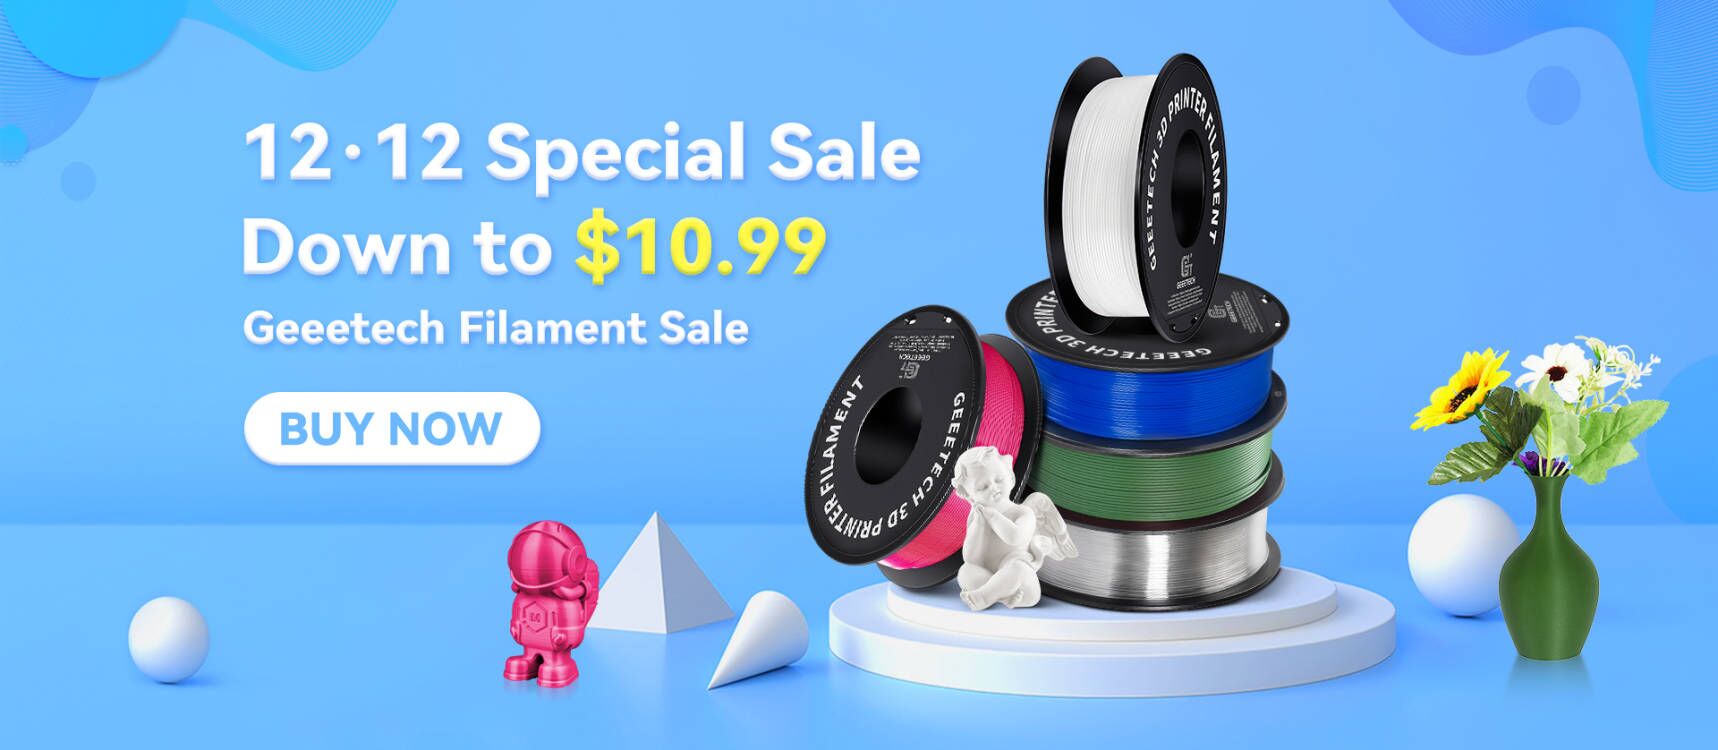 12.12 filament clearance - pc